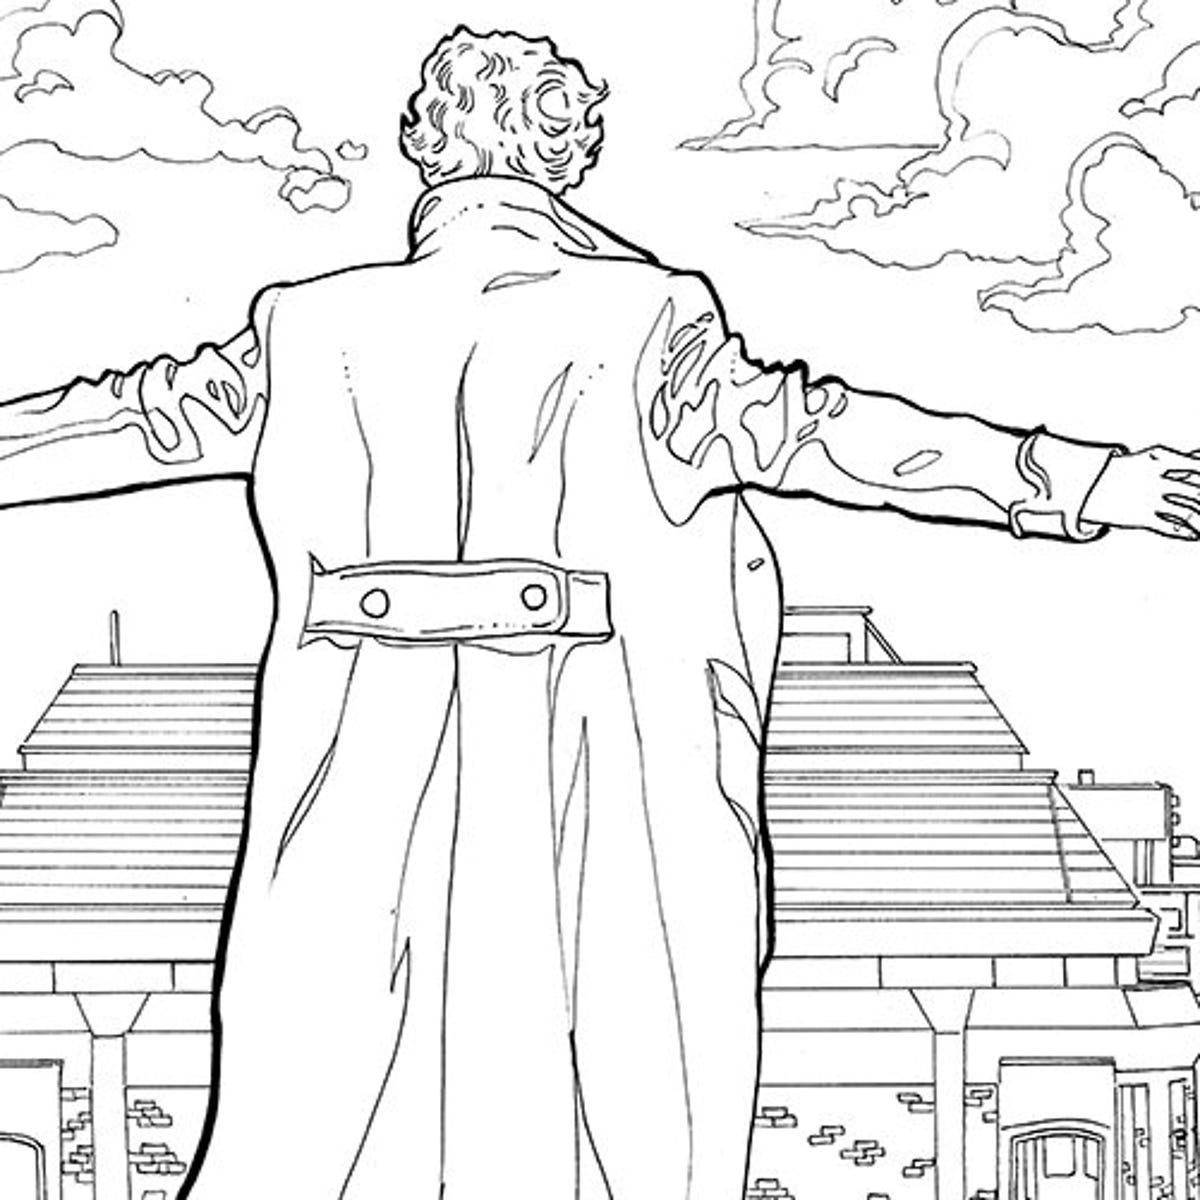 Search for clues and scandal in the 'Sherlock' coloring book - CNET